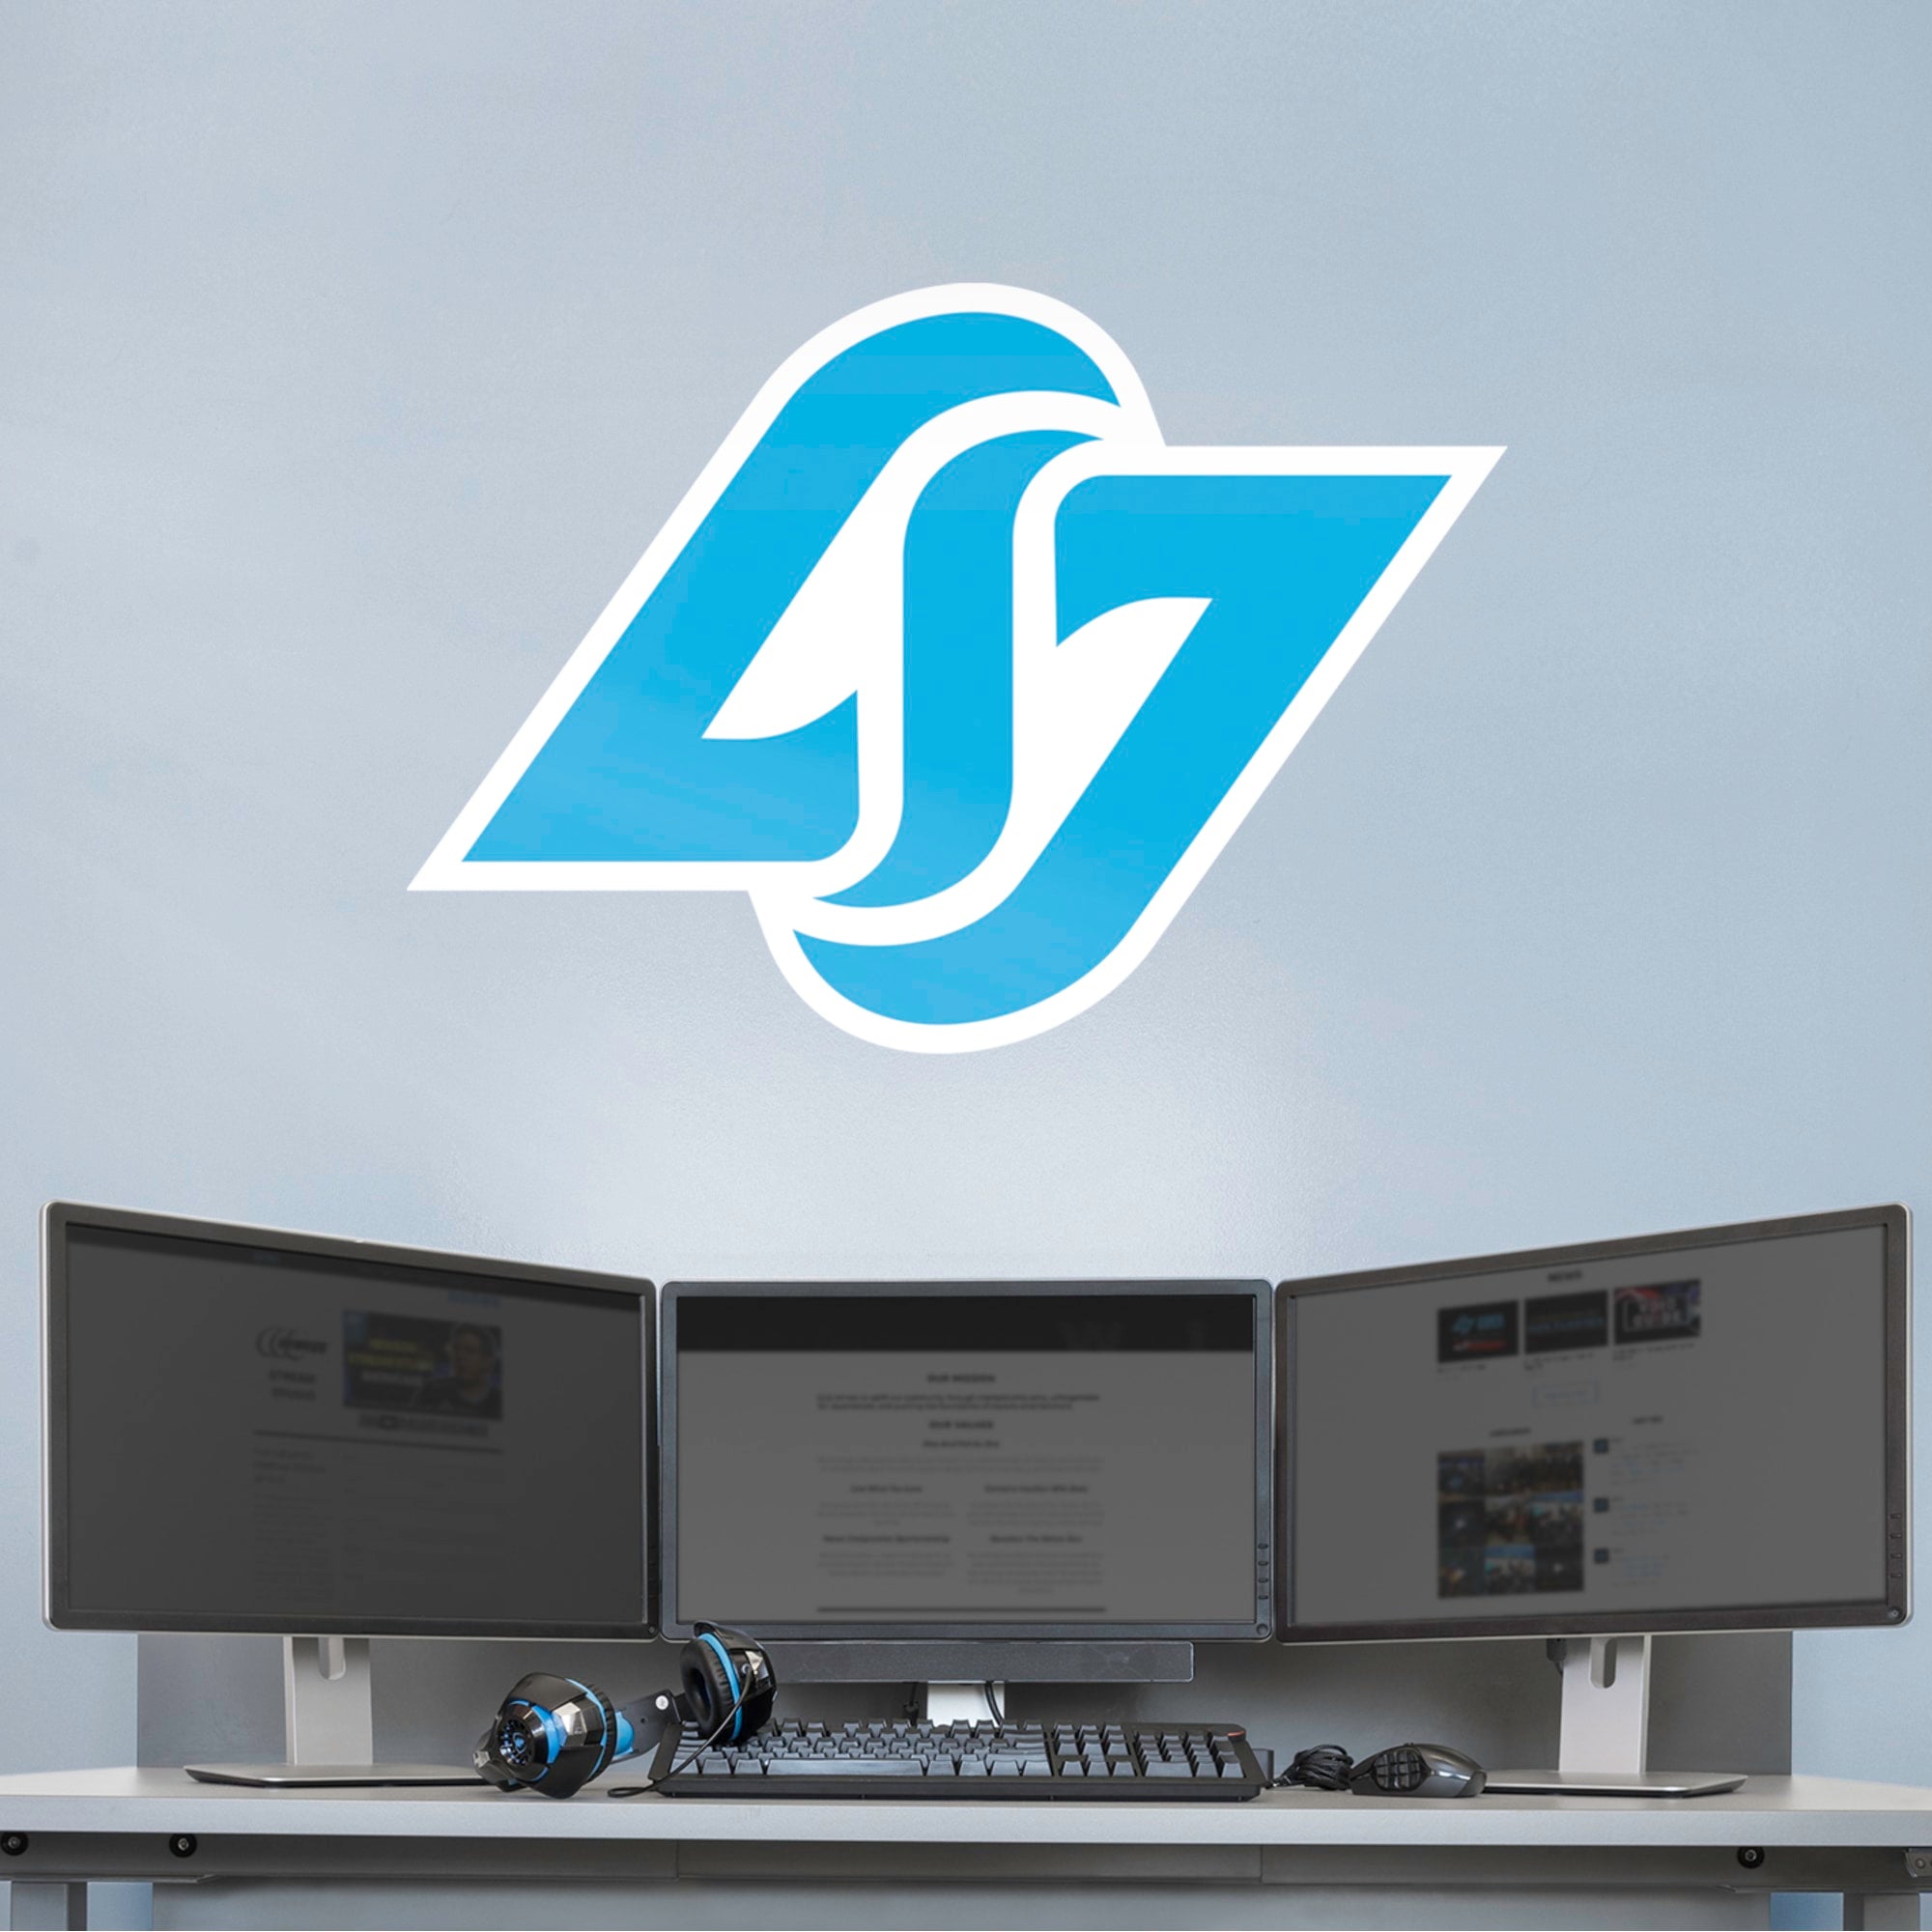 Counter Logic Gaming: Logo - Officially Licensed Removable Wall Decal 31.0"W x 45.0"H by Fathead | Vinyl